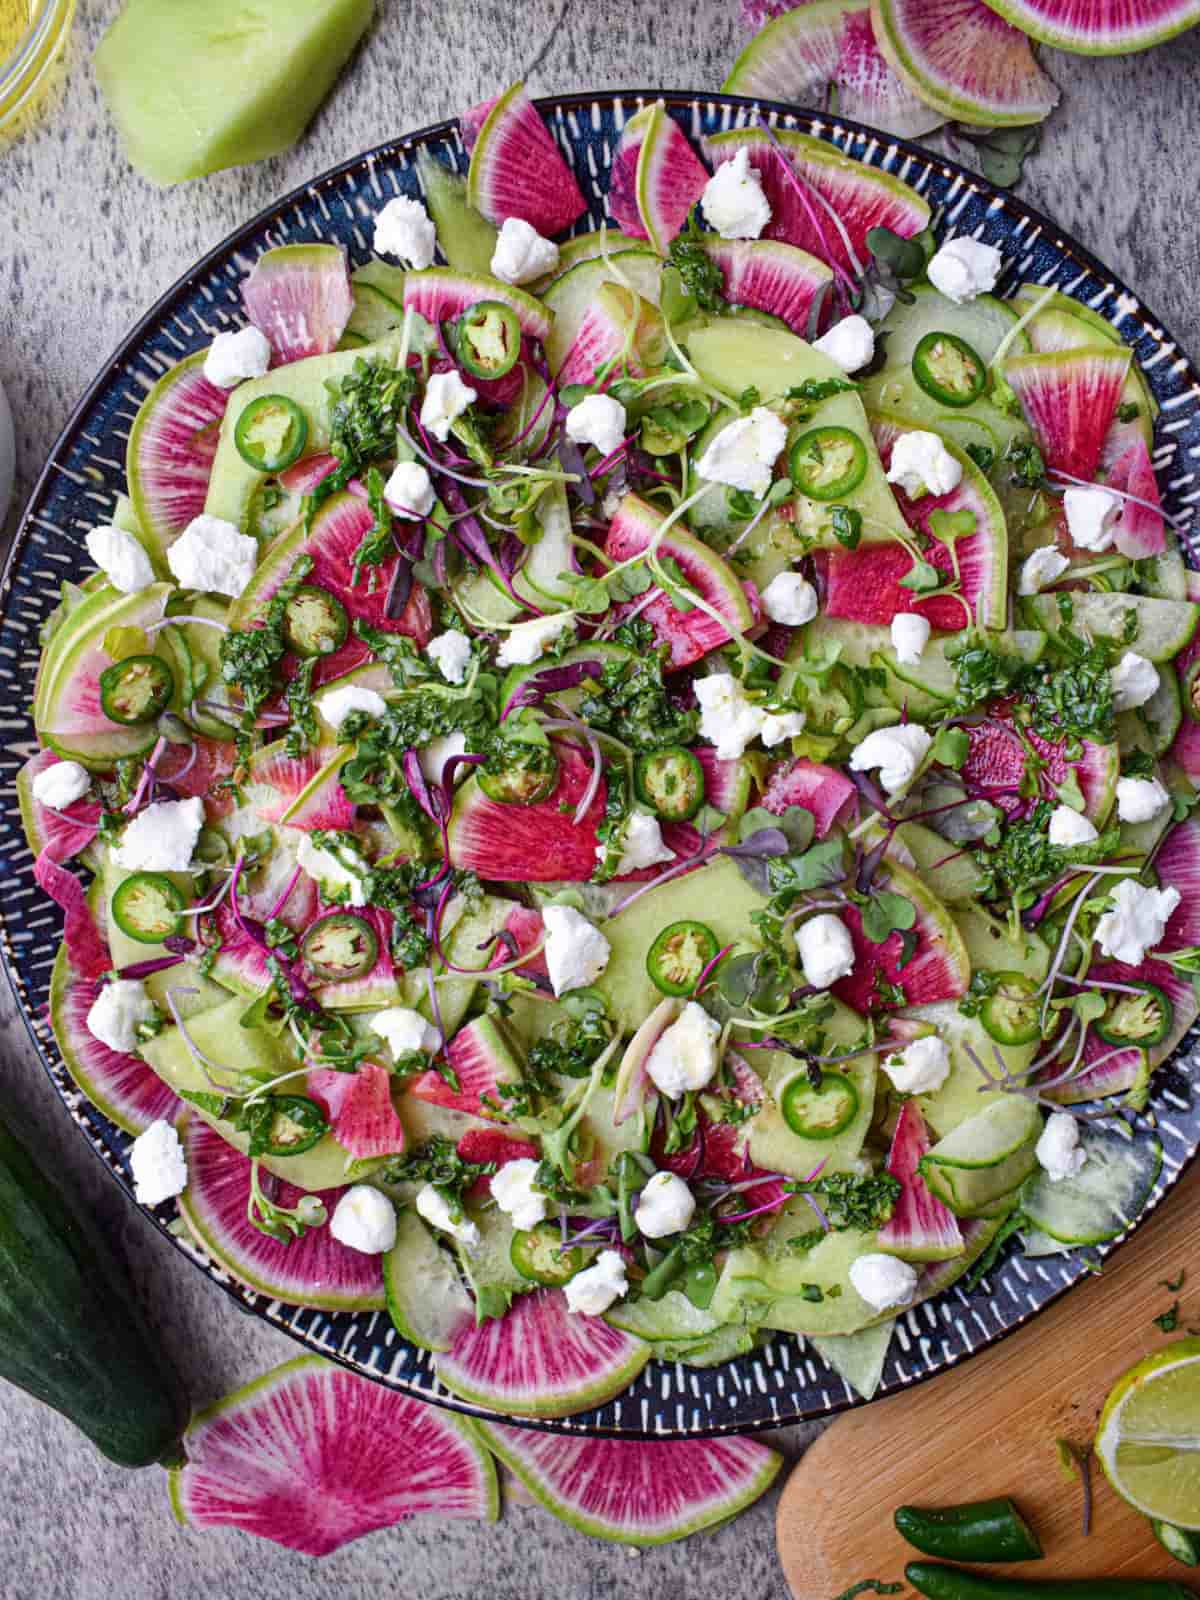 melon cucumber radish salad in a blue and white patterned salad platter surrounded by slices of watermelon radish